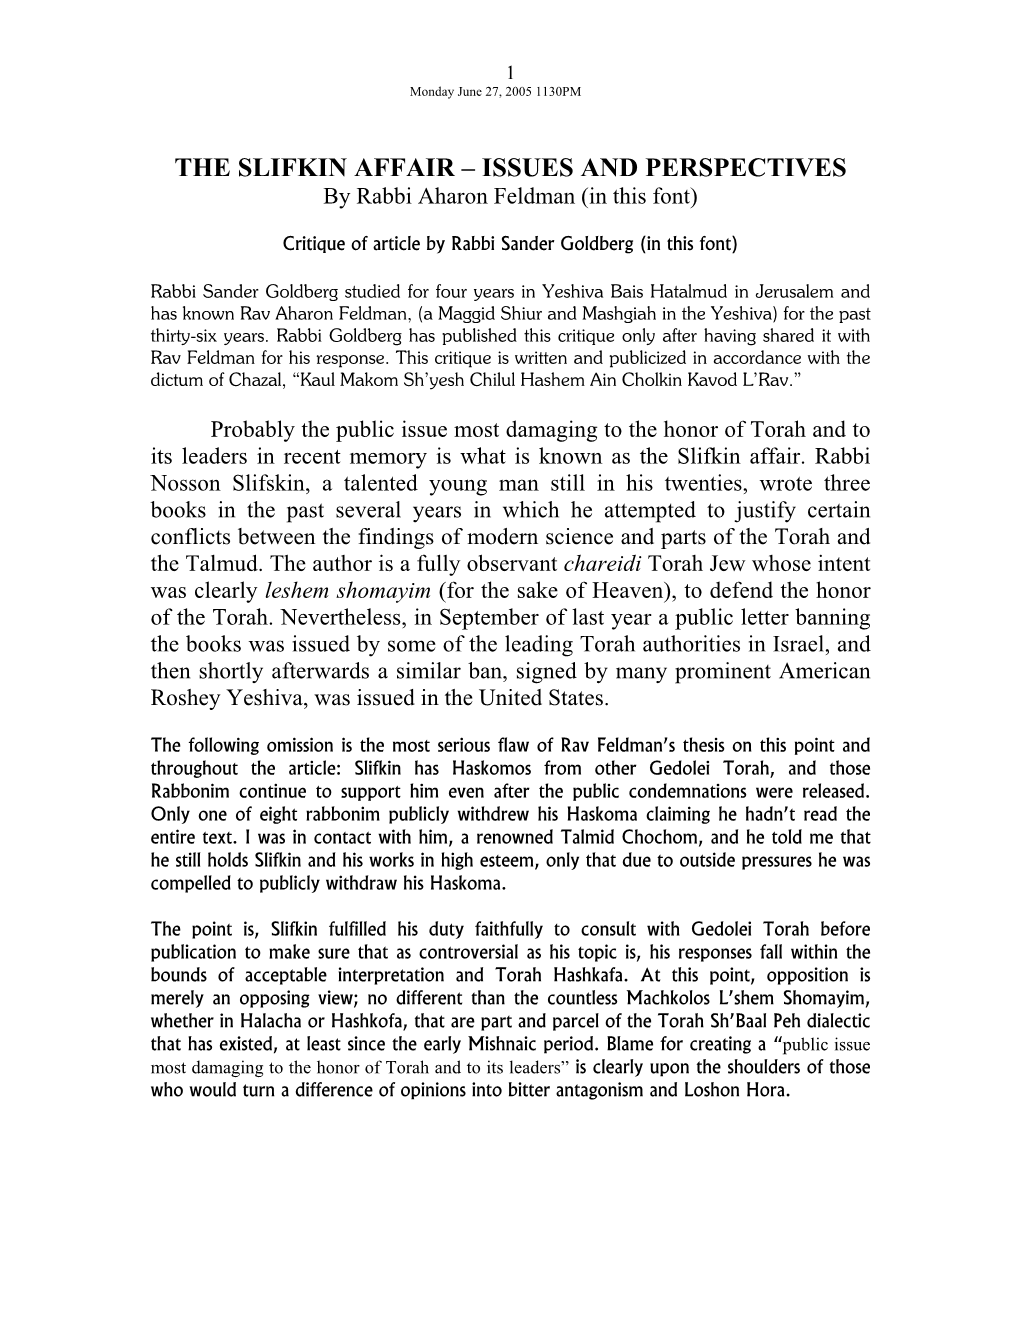 THE SLIFKIN AFFAIR – ISSUES and PERSPECTIVES by Rabbi Aharon Feldman (In This Font)